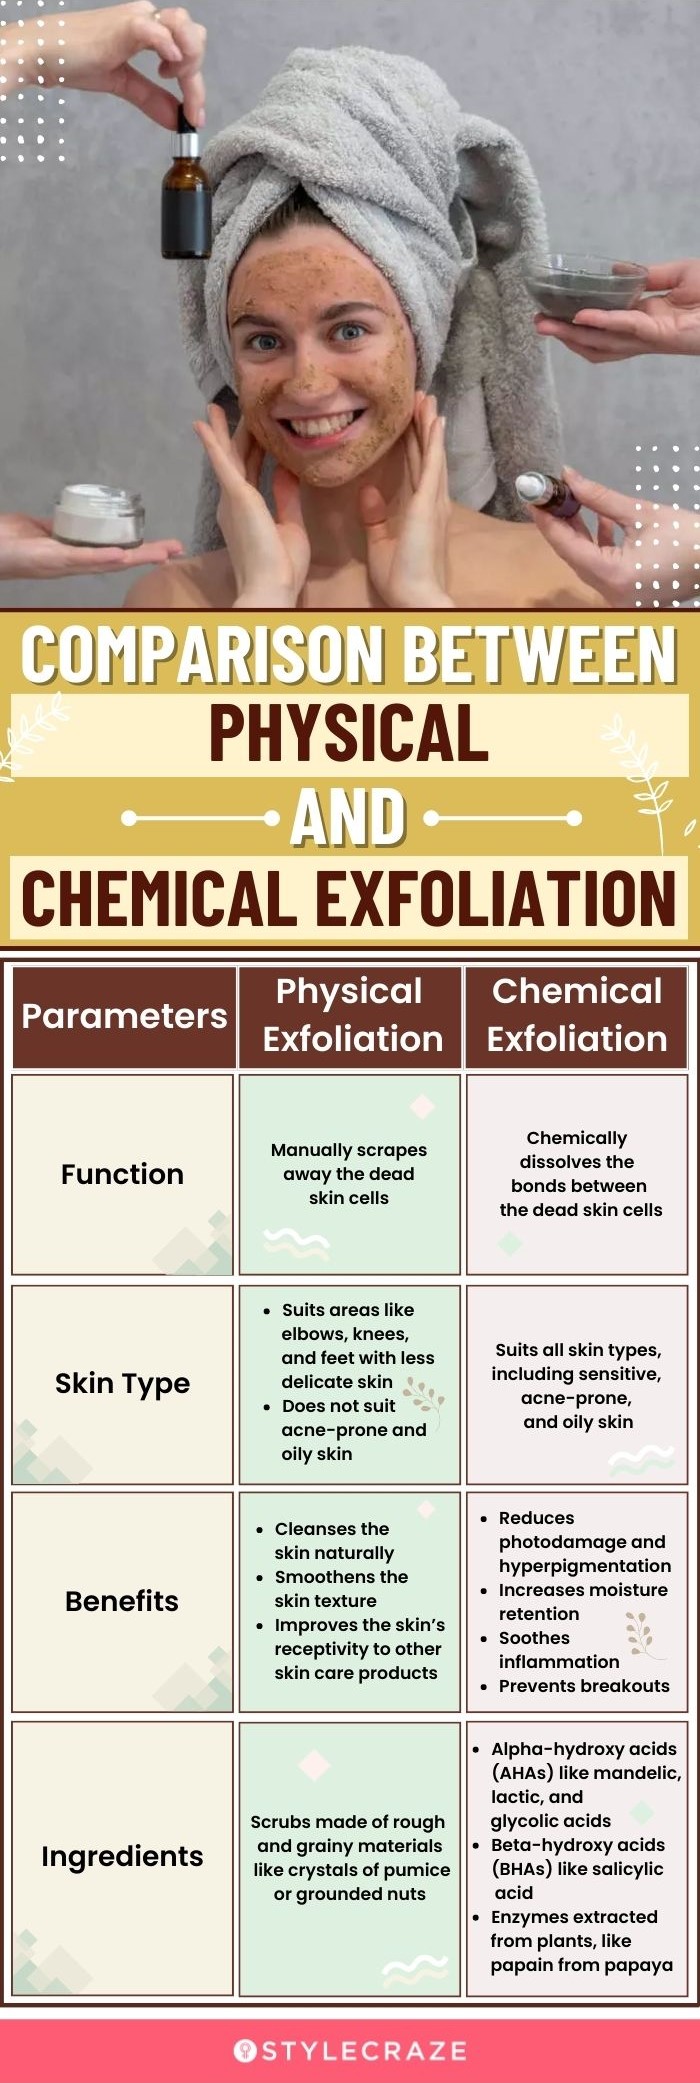 comparison between physical and chemical exfoliation (infographic)